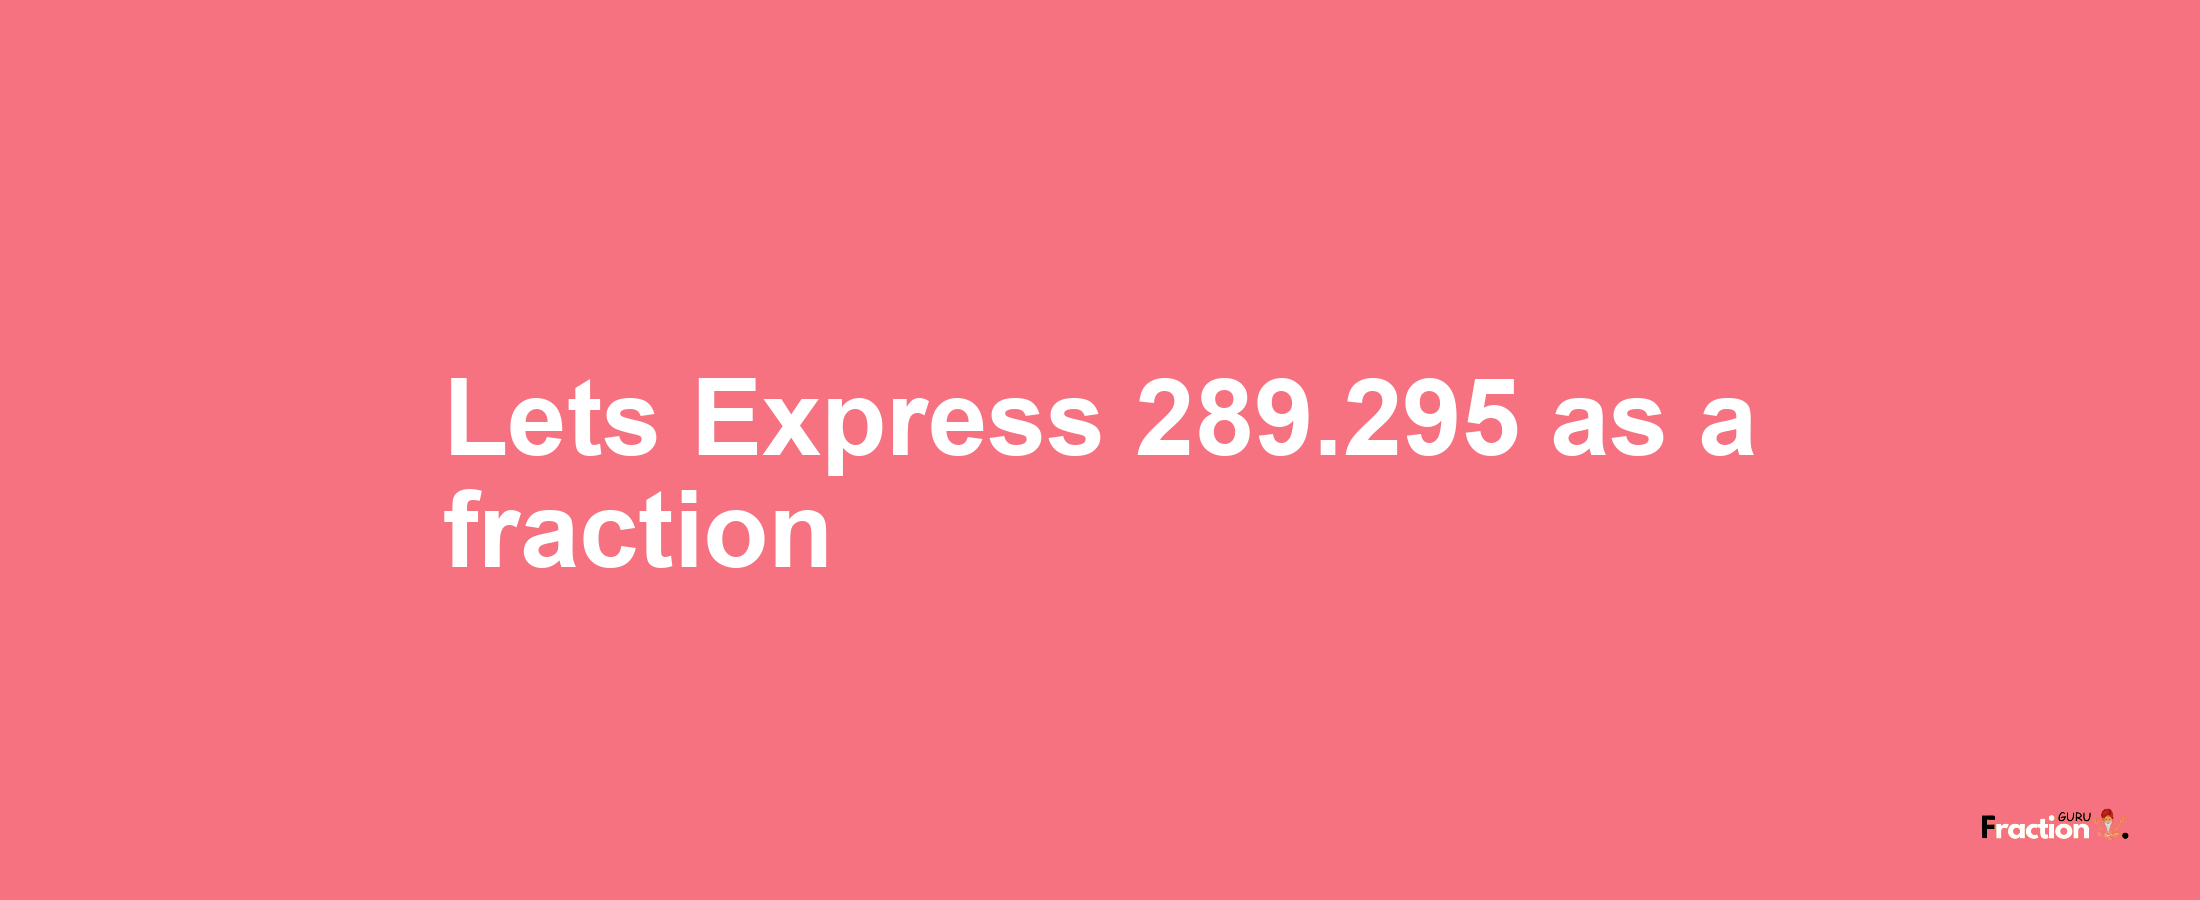 Lets Express 289.295 as afraction